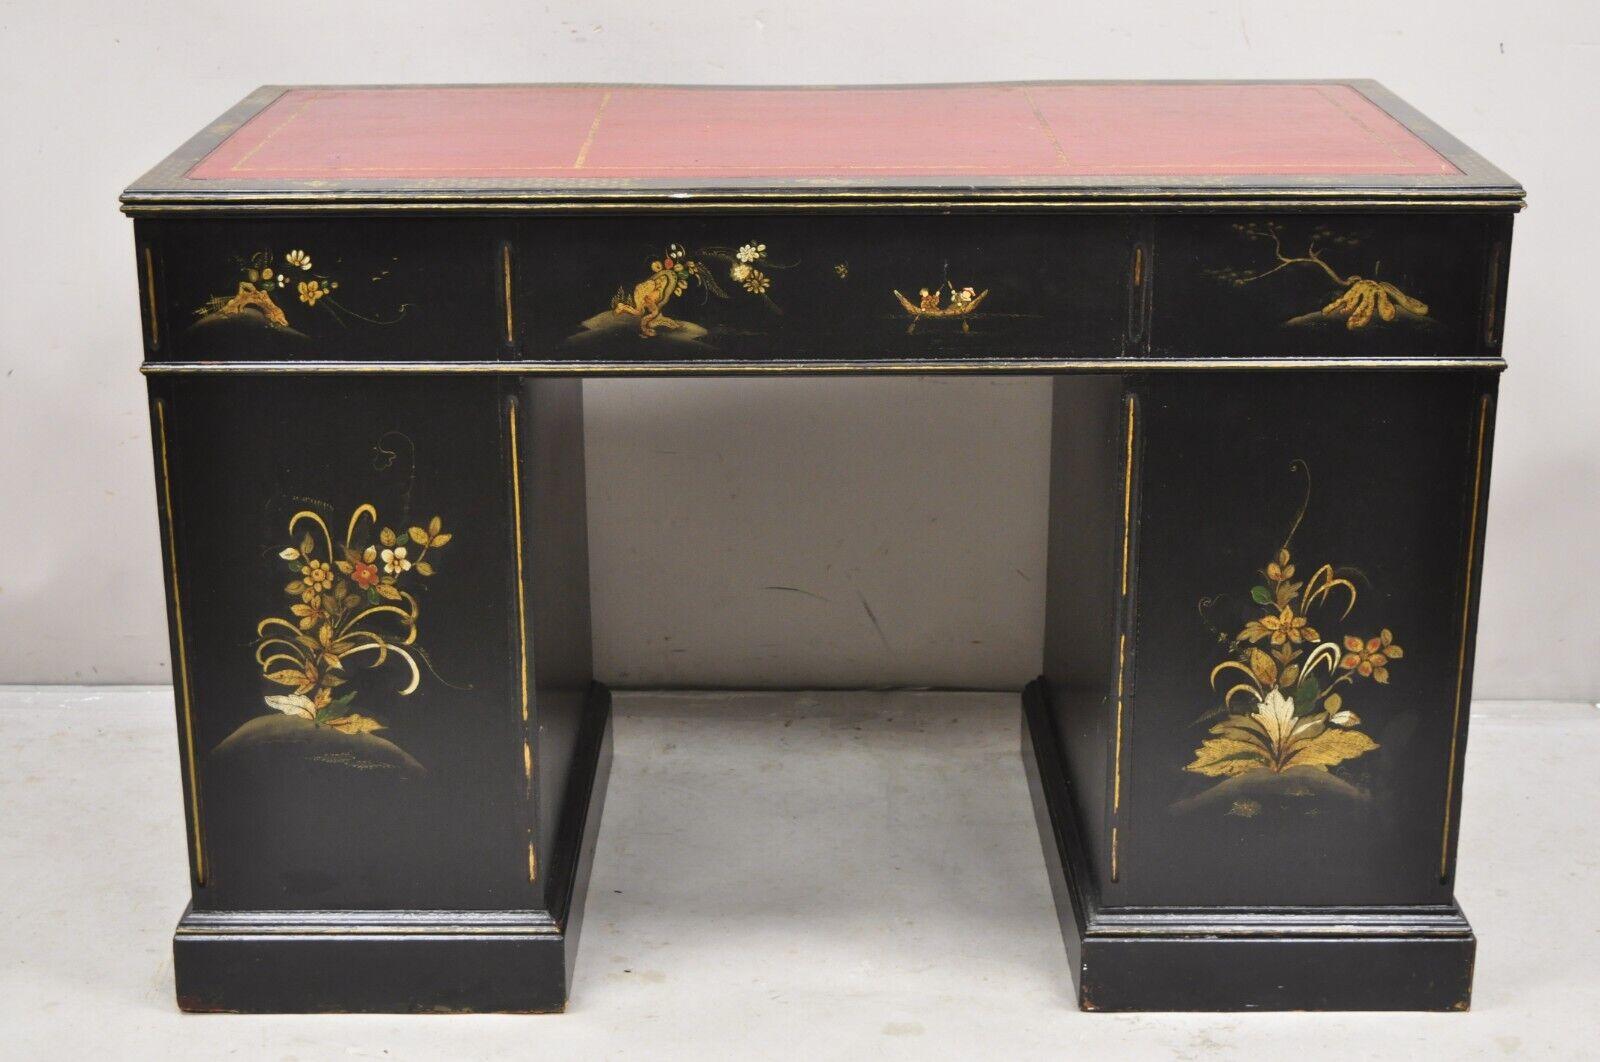 Vintage Chinoiserie Black Chinese Painted Red Leather Top Kneehole Writing Desk For Sale 7